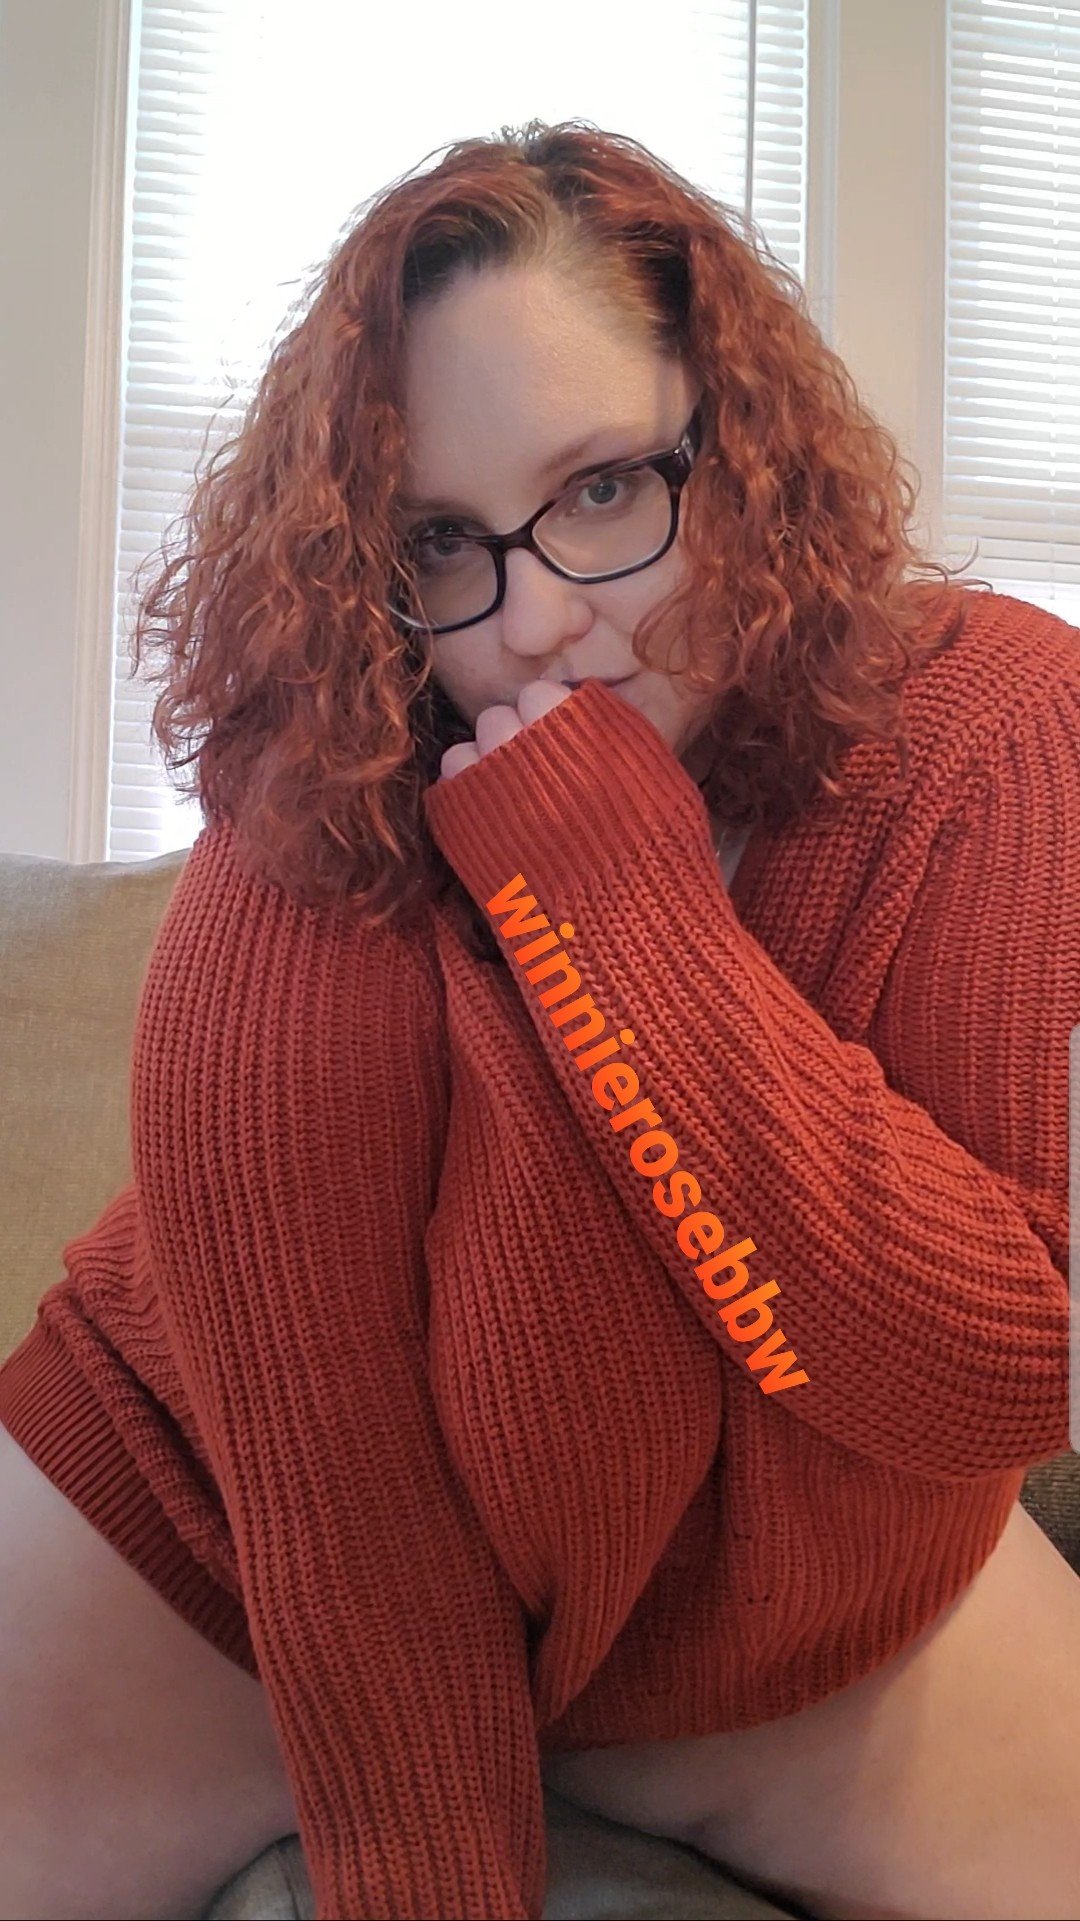 Photo by Winnie Rose with the username @winnierose-bbw, who is a star user,  December 18, 2019 at 10:27 PM. The post is about the topic chubby amateurs and the text says 'Let's cozy up on the couch ;)'